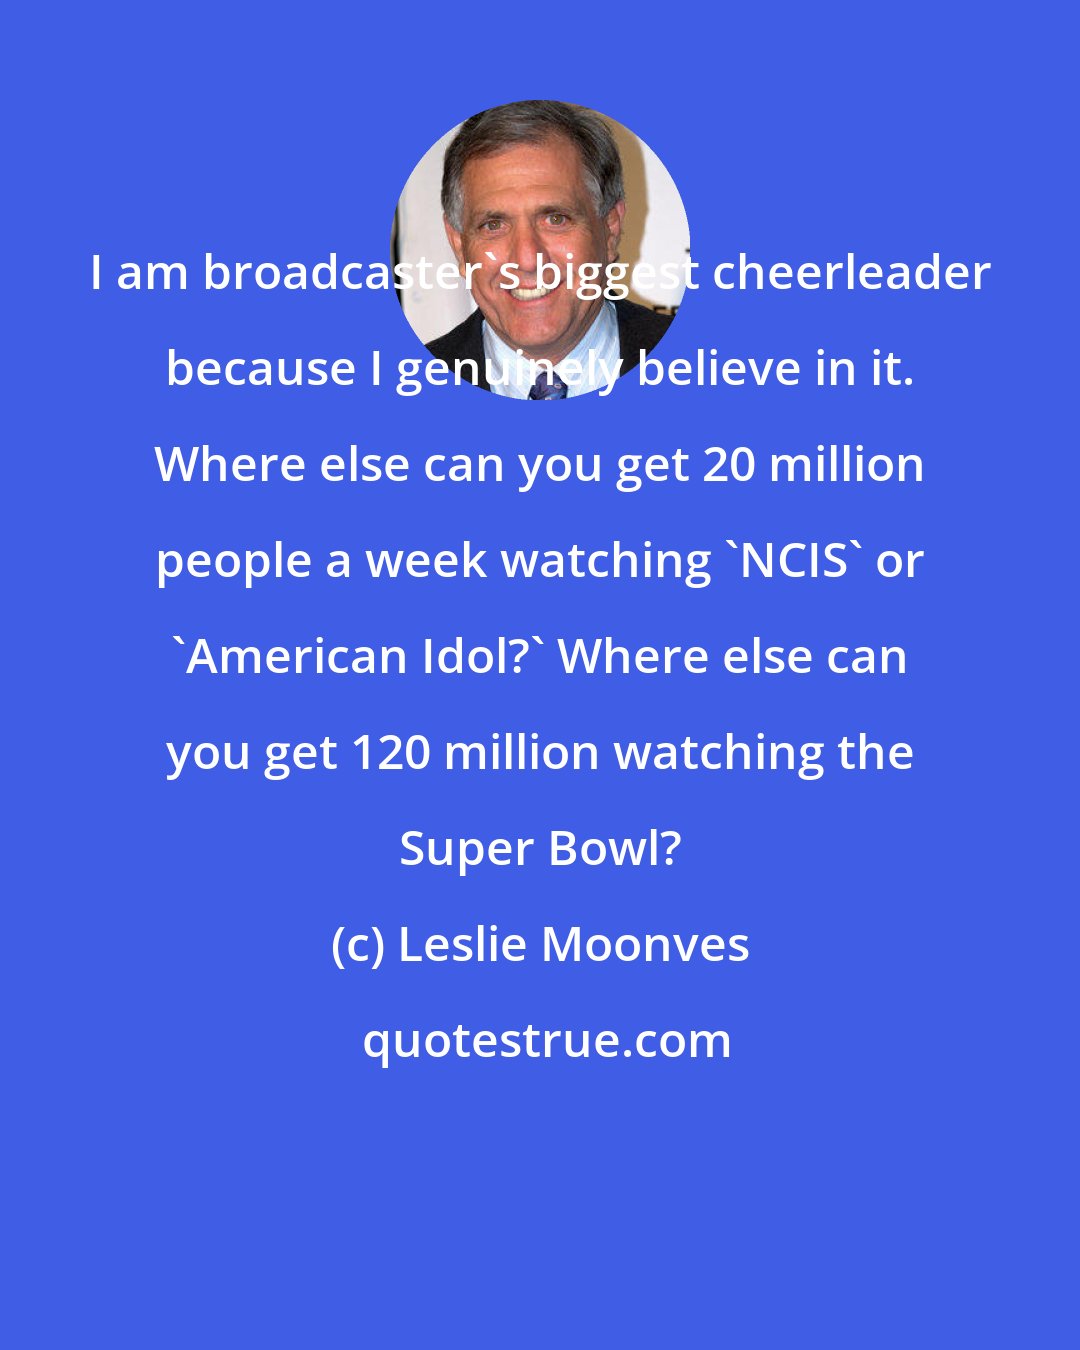 Leslie Moonves: I am broadcaster's biggest cheerleader because I genuinely believe in it. Where else can you get 20 million people a week watching 'NCIS' or 'American Idol?' Where else can you get 120 million watching the Super Bowl?